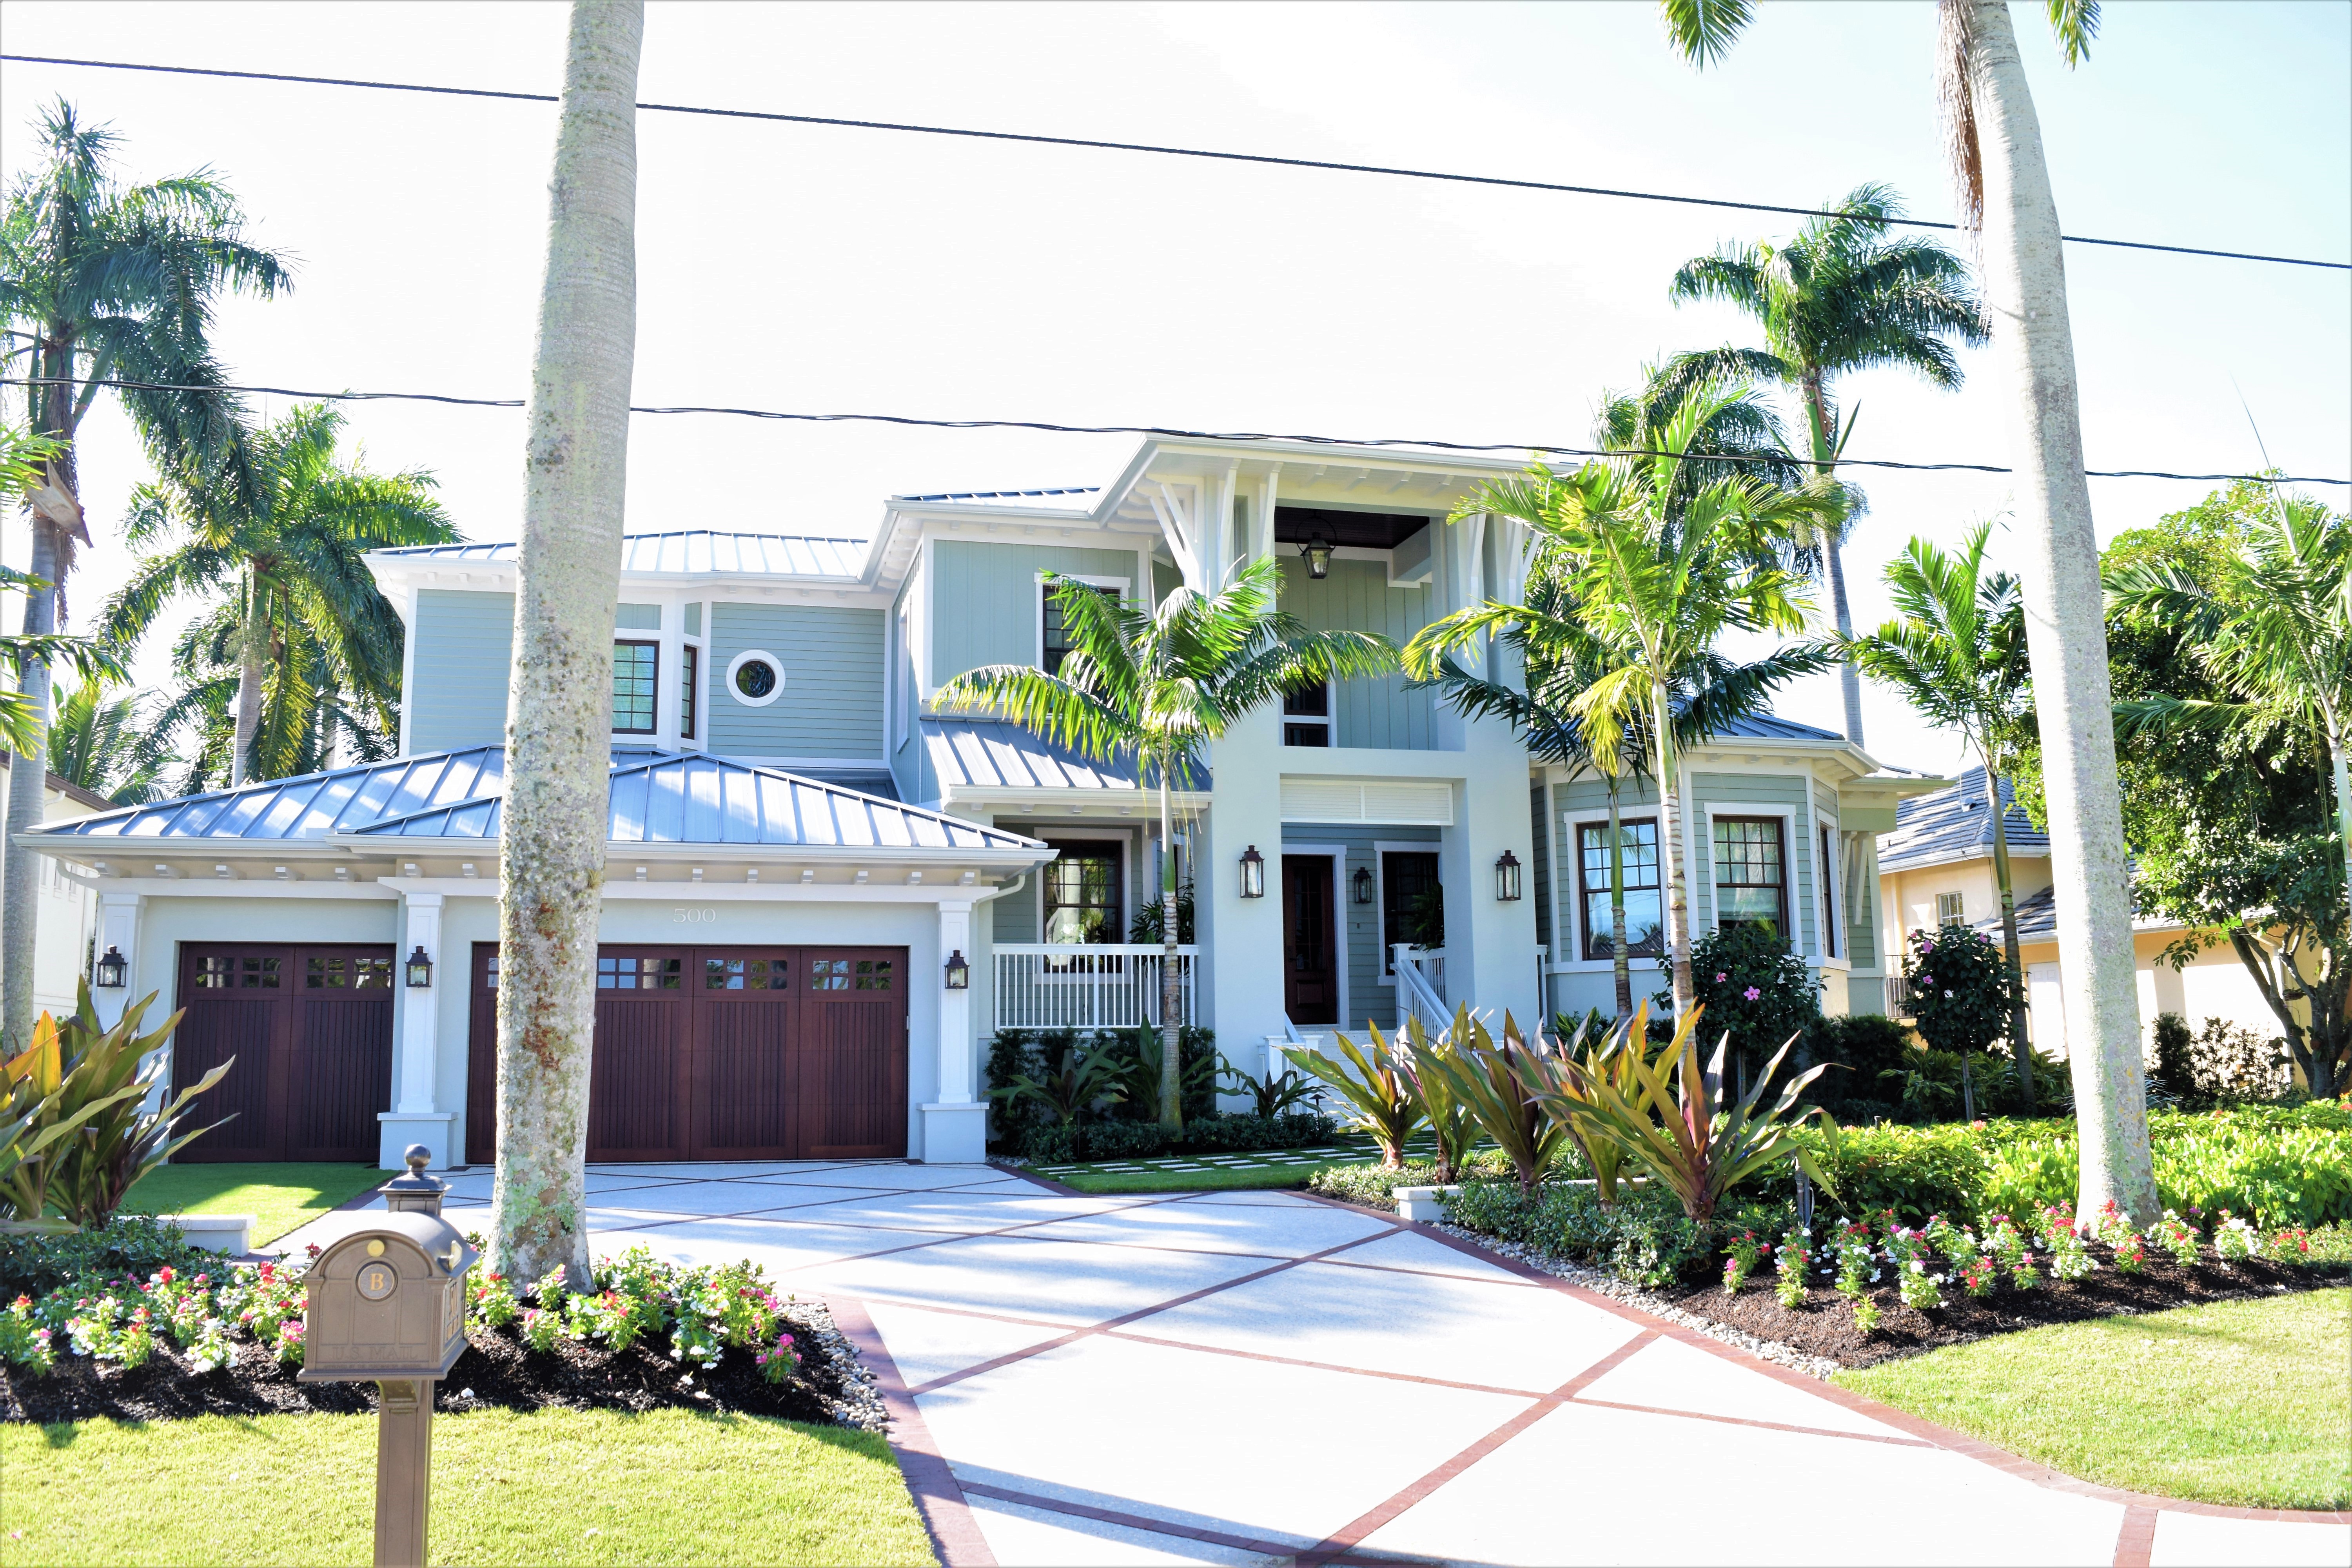 Residential Property Management in and near Lely Florida